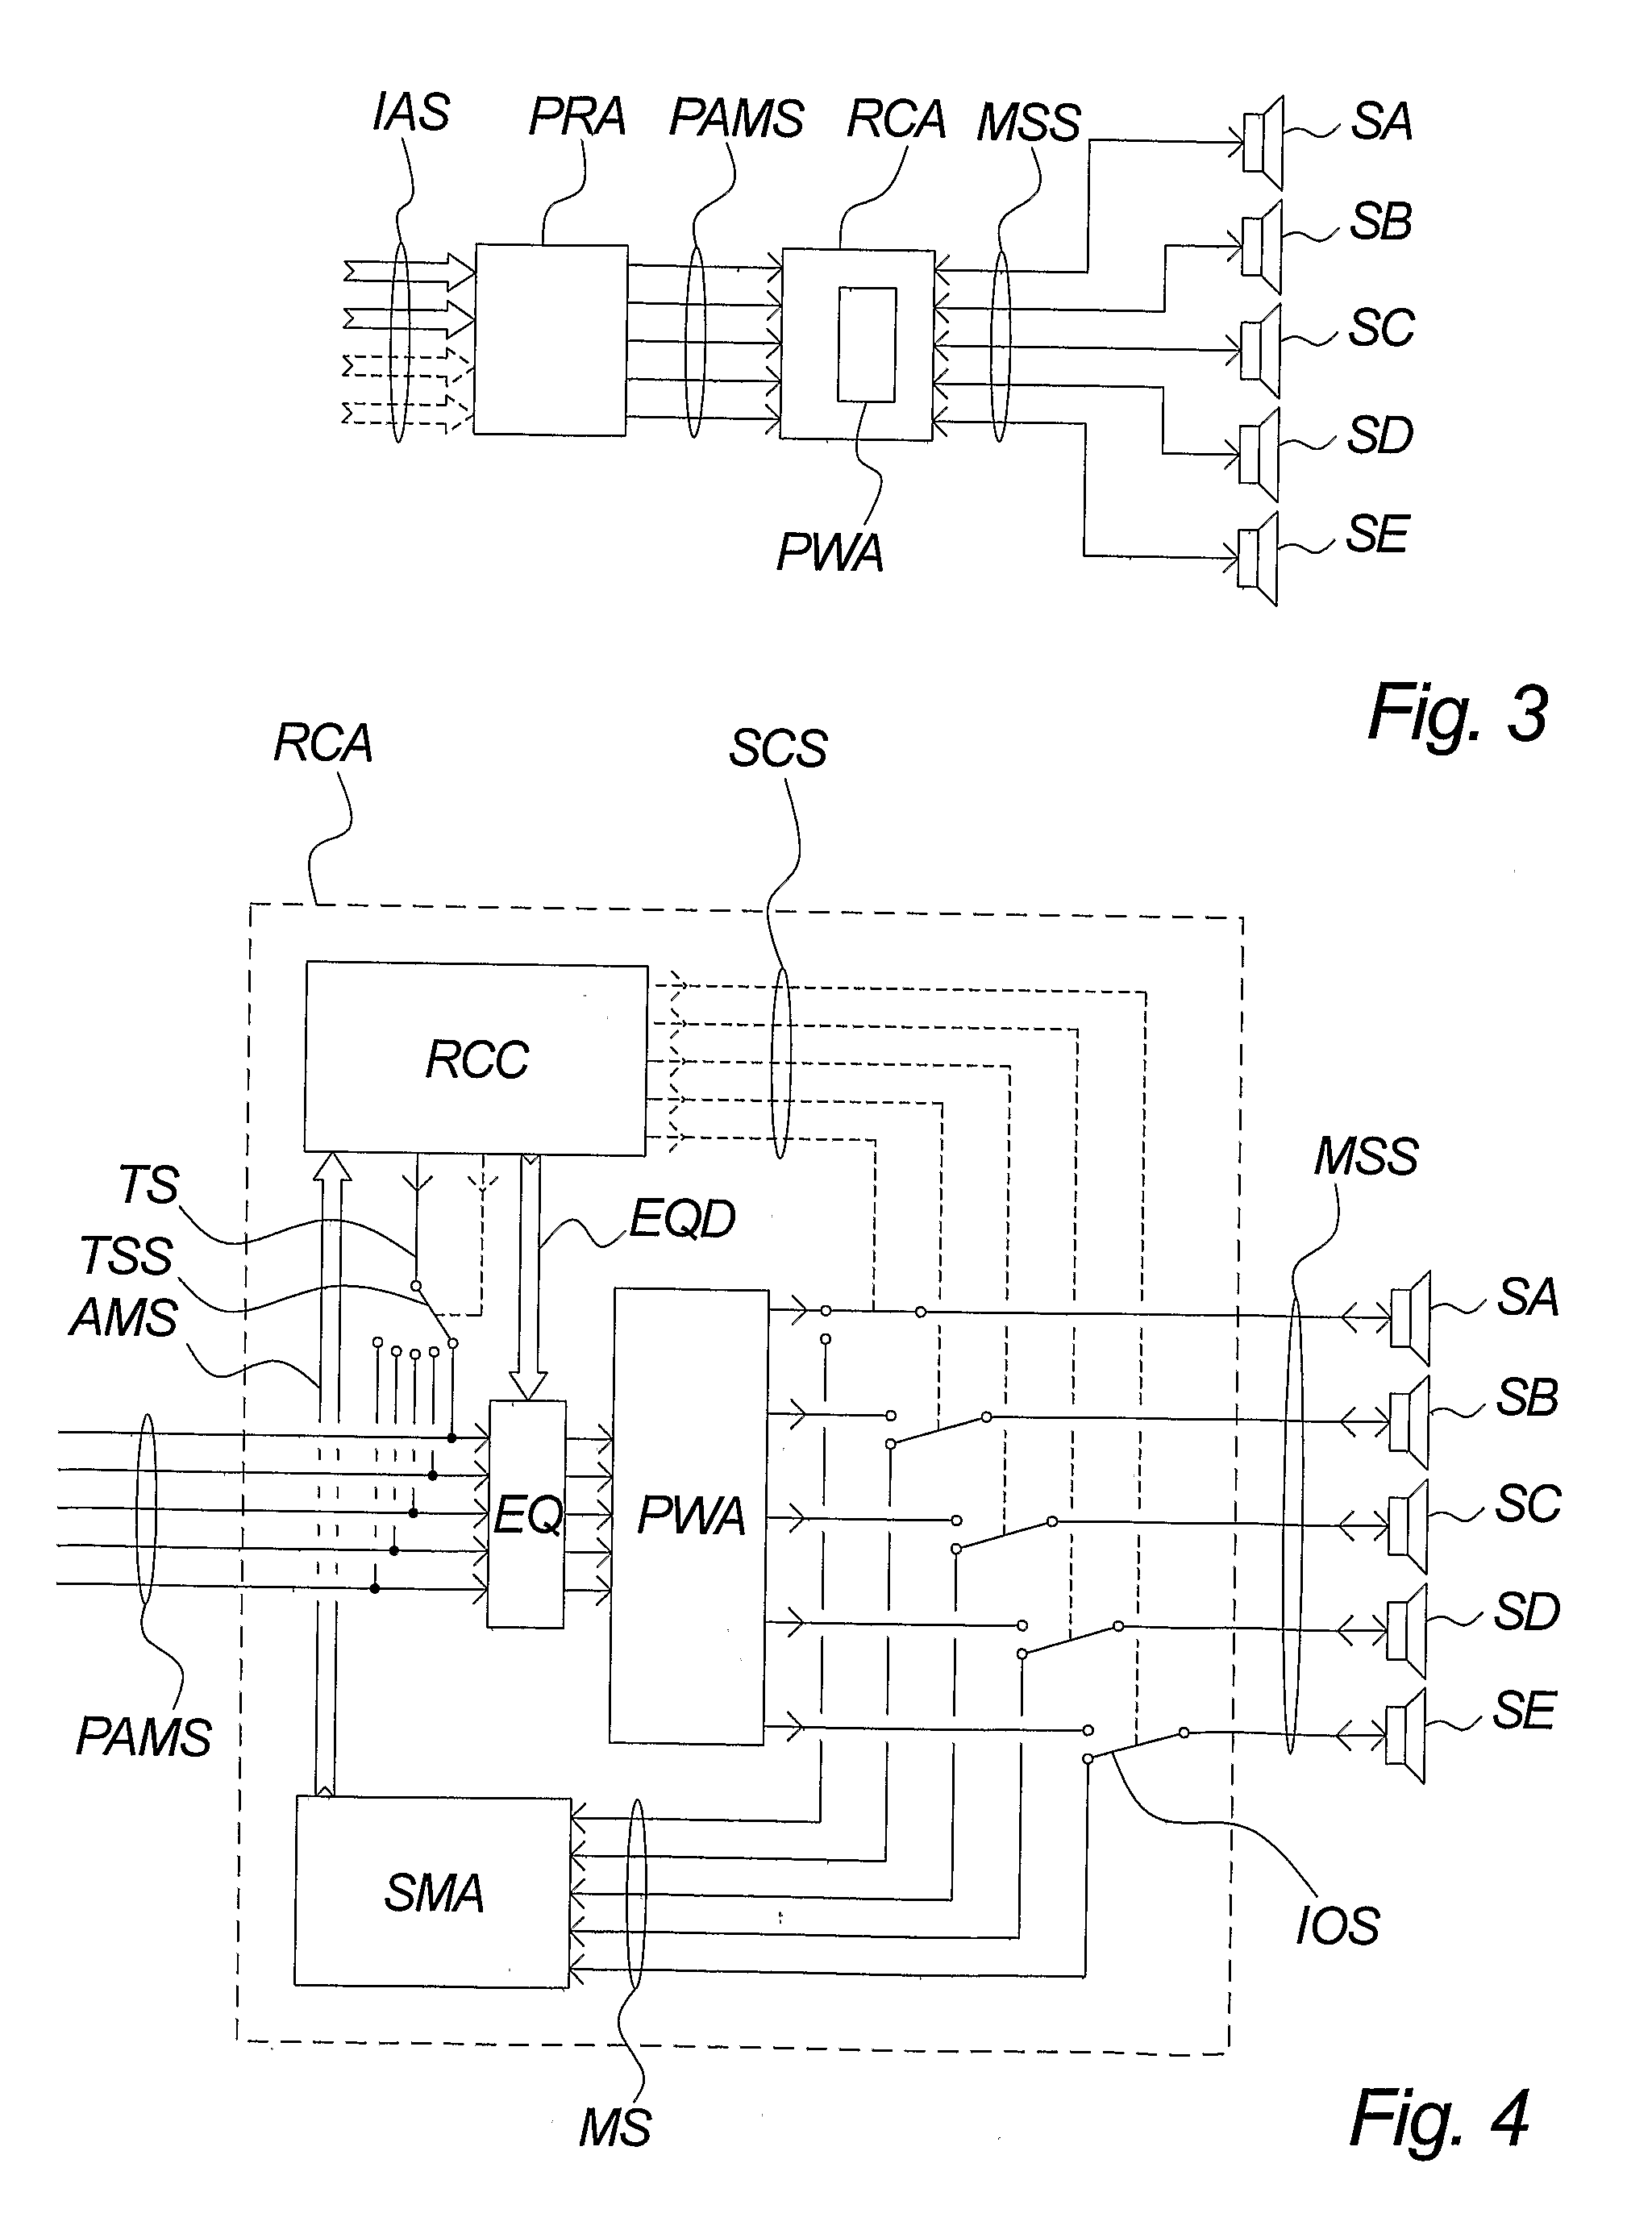 Method of Performing Measurements By Means of an Audio System Comprising Passive Loudspeakers